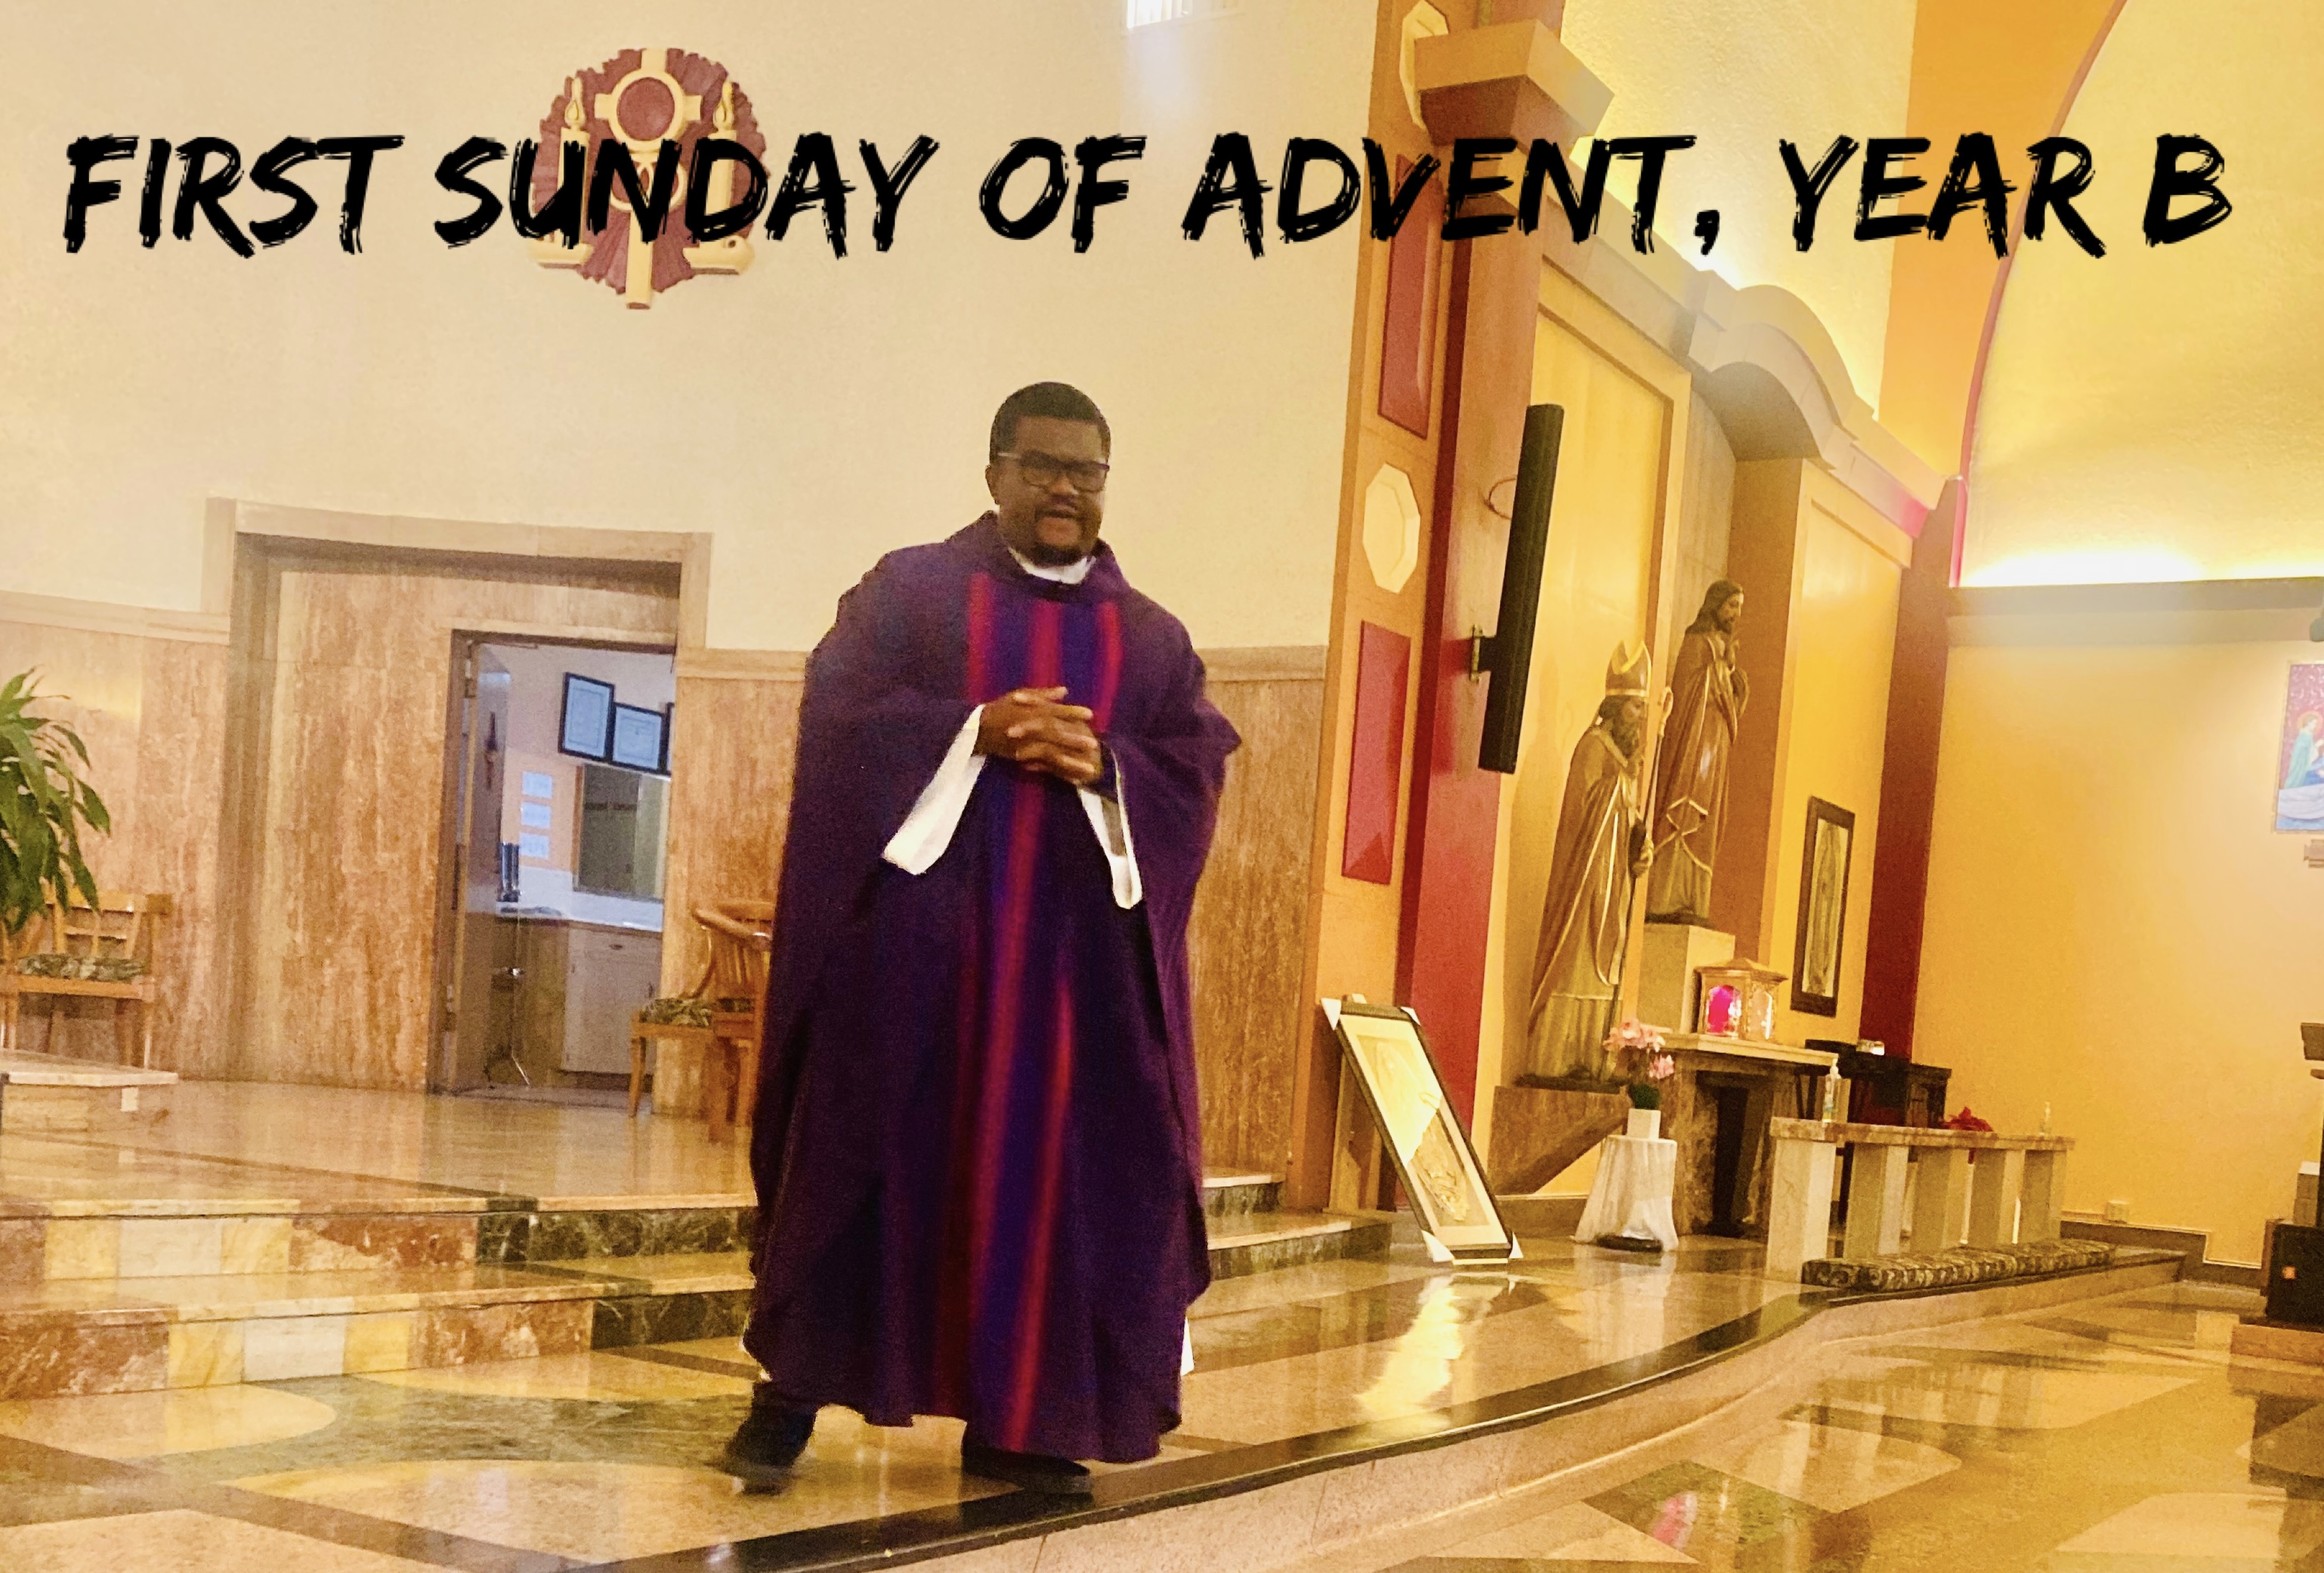 First Sunday of Advent, Year B